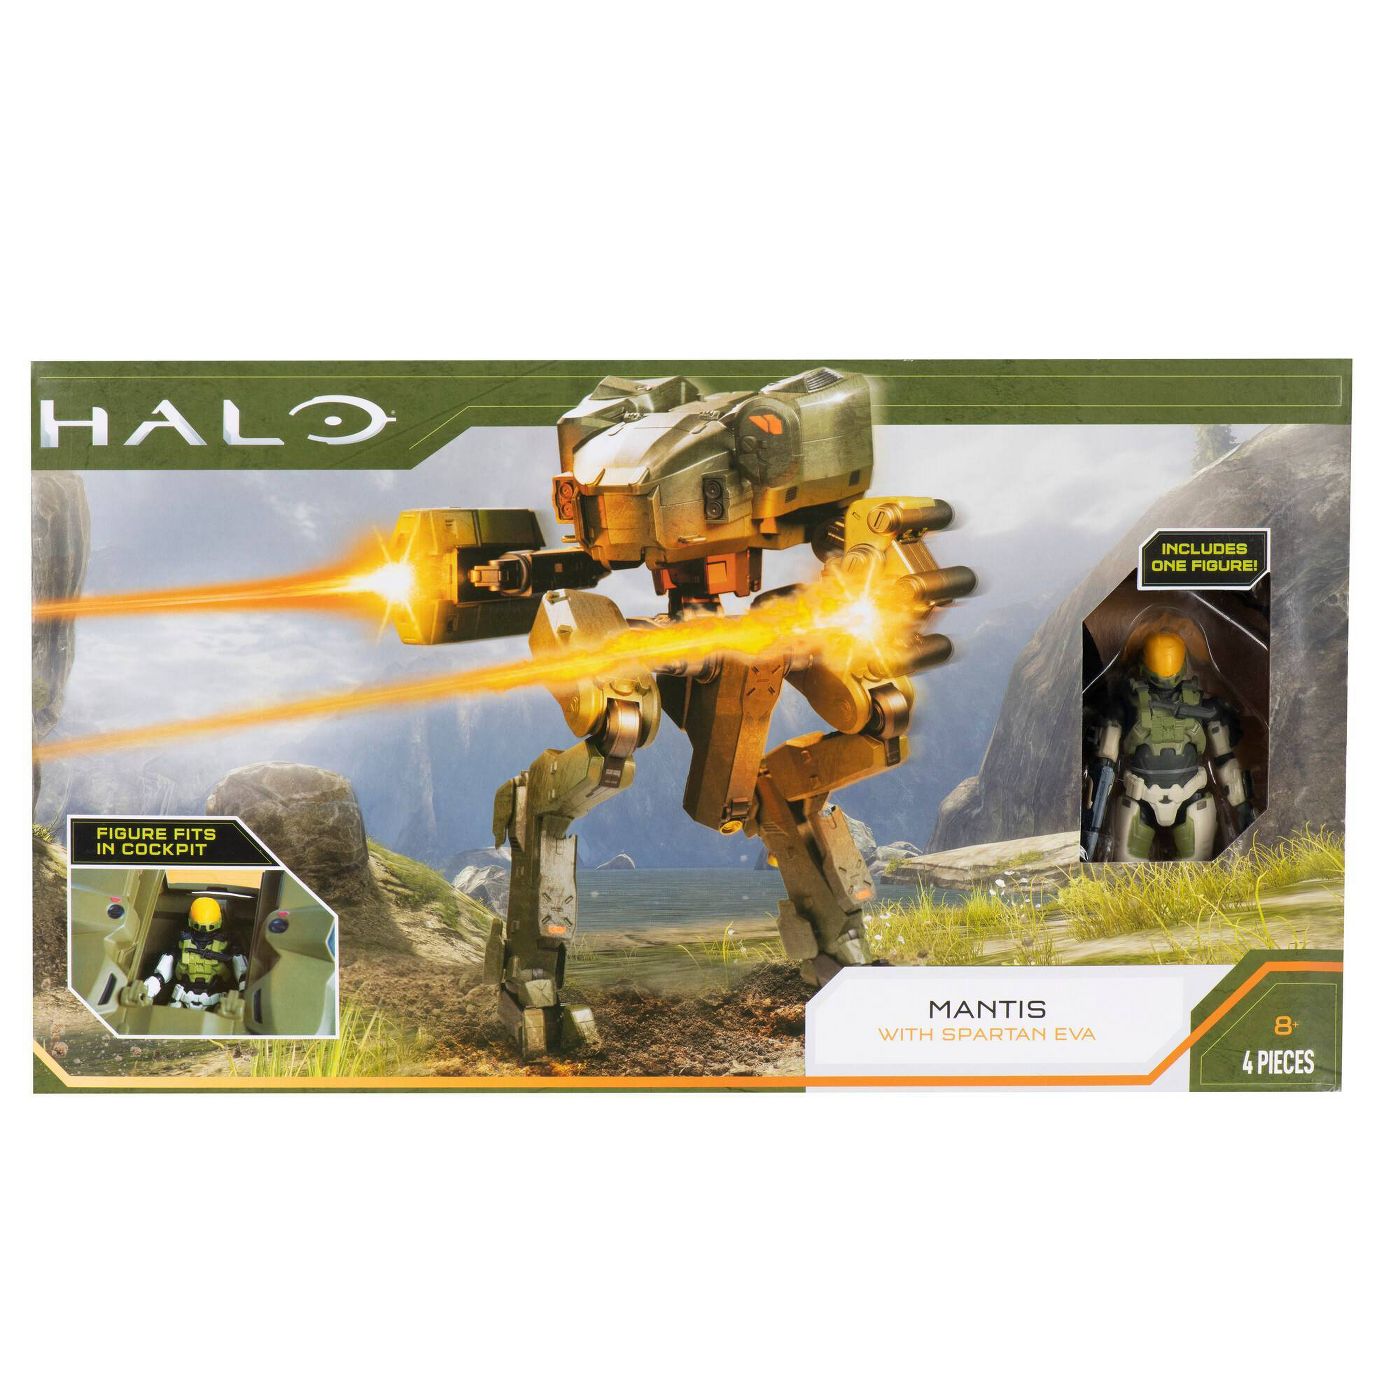 World of Halo Deluxe 2 Figure Pack - UNSC Mantis and Spartan EVA - Armor Defense System画像